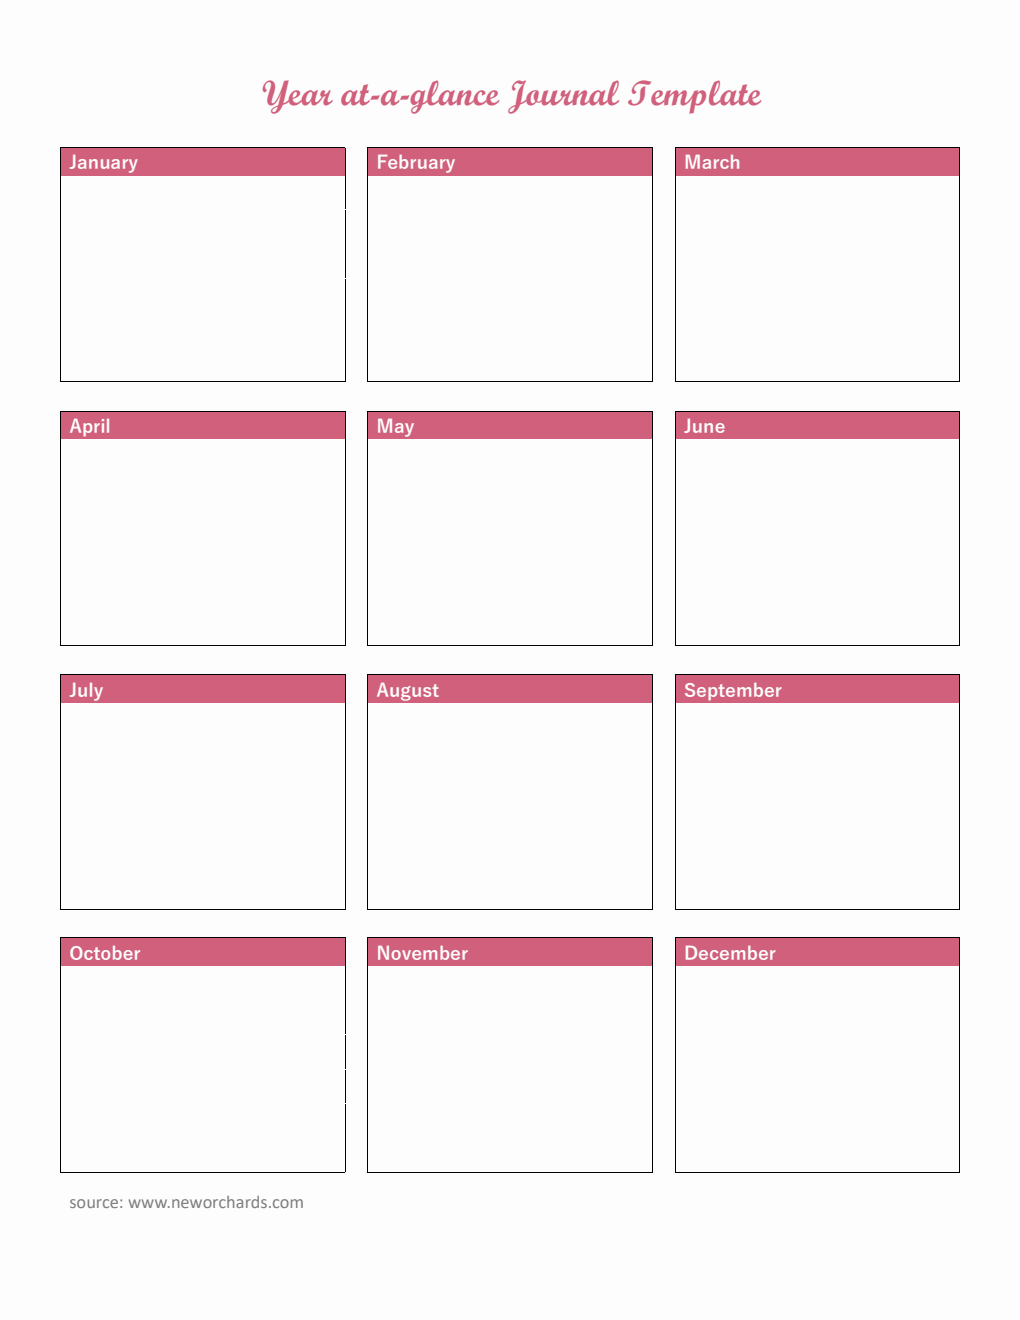 Basic Year at a Glance Template in PDF